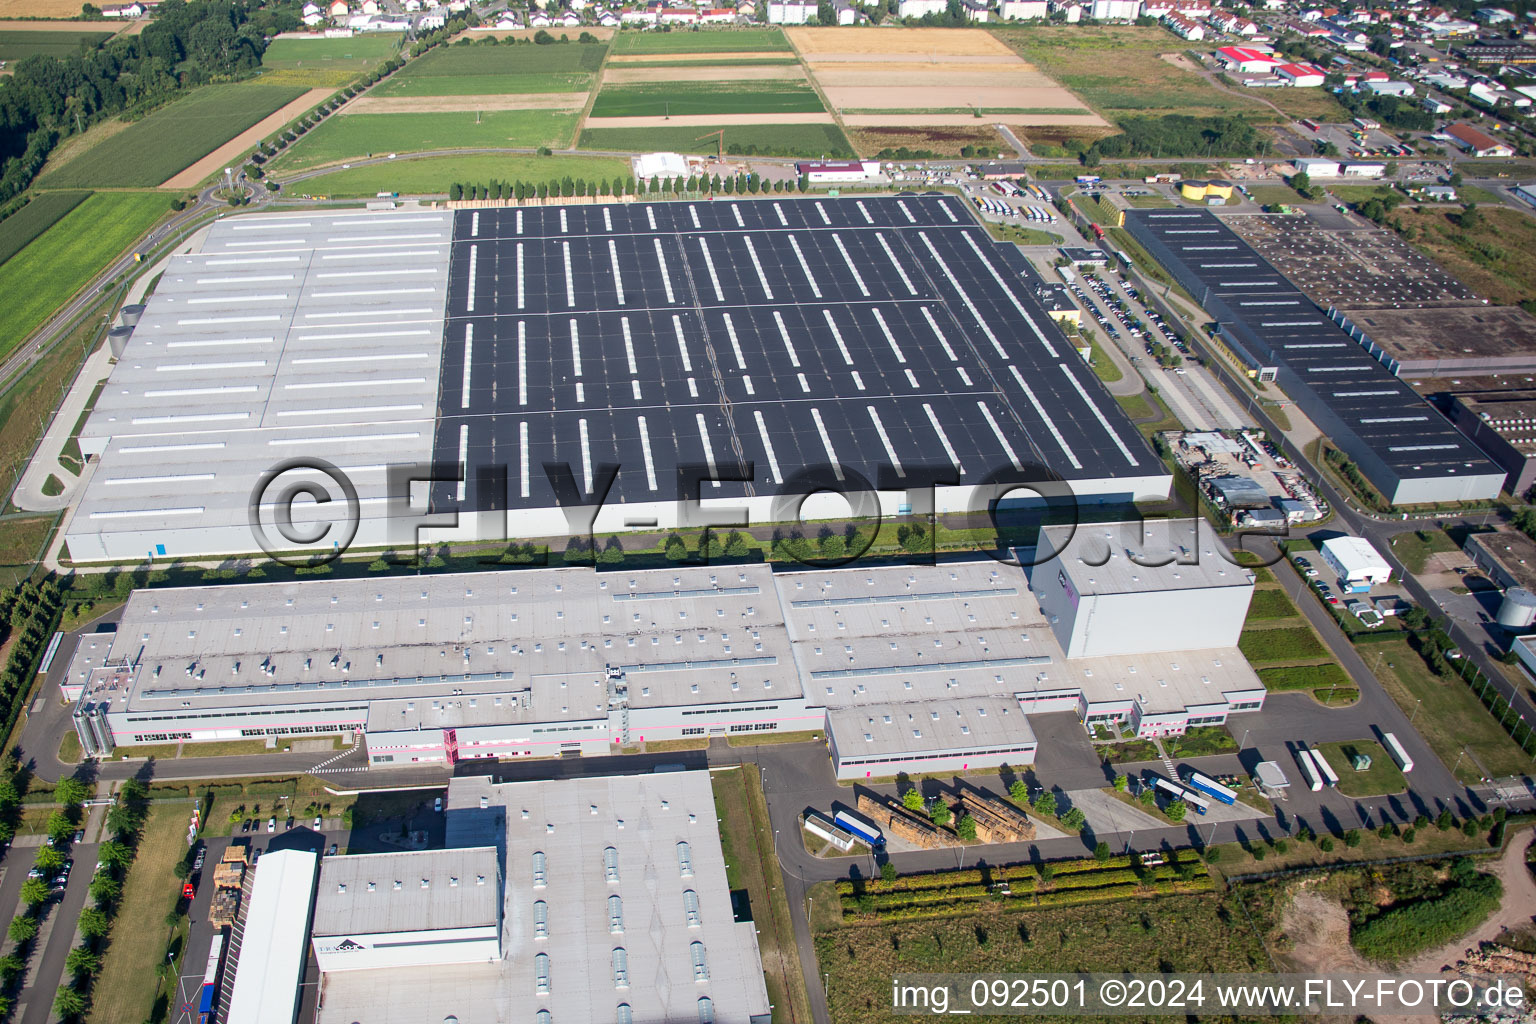 Industrial Estate in Offenbach an der Queich in the state Rhineland-Palatinate, Germany viewn from the air